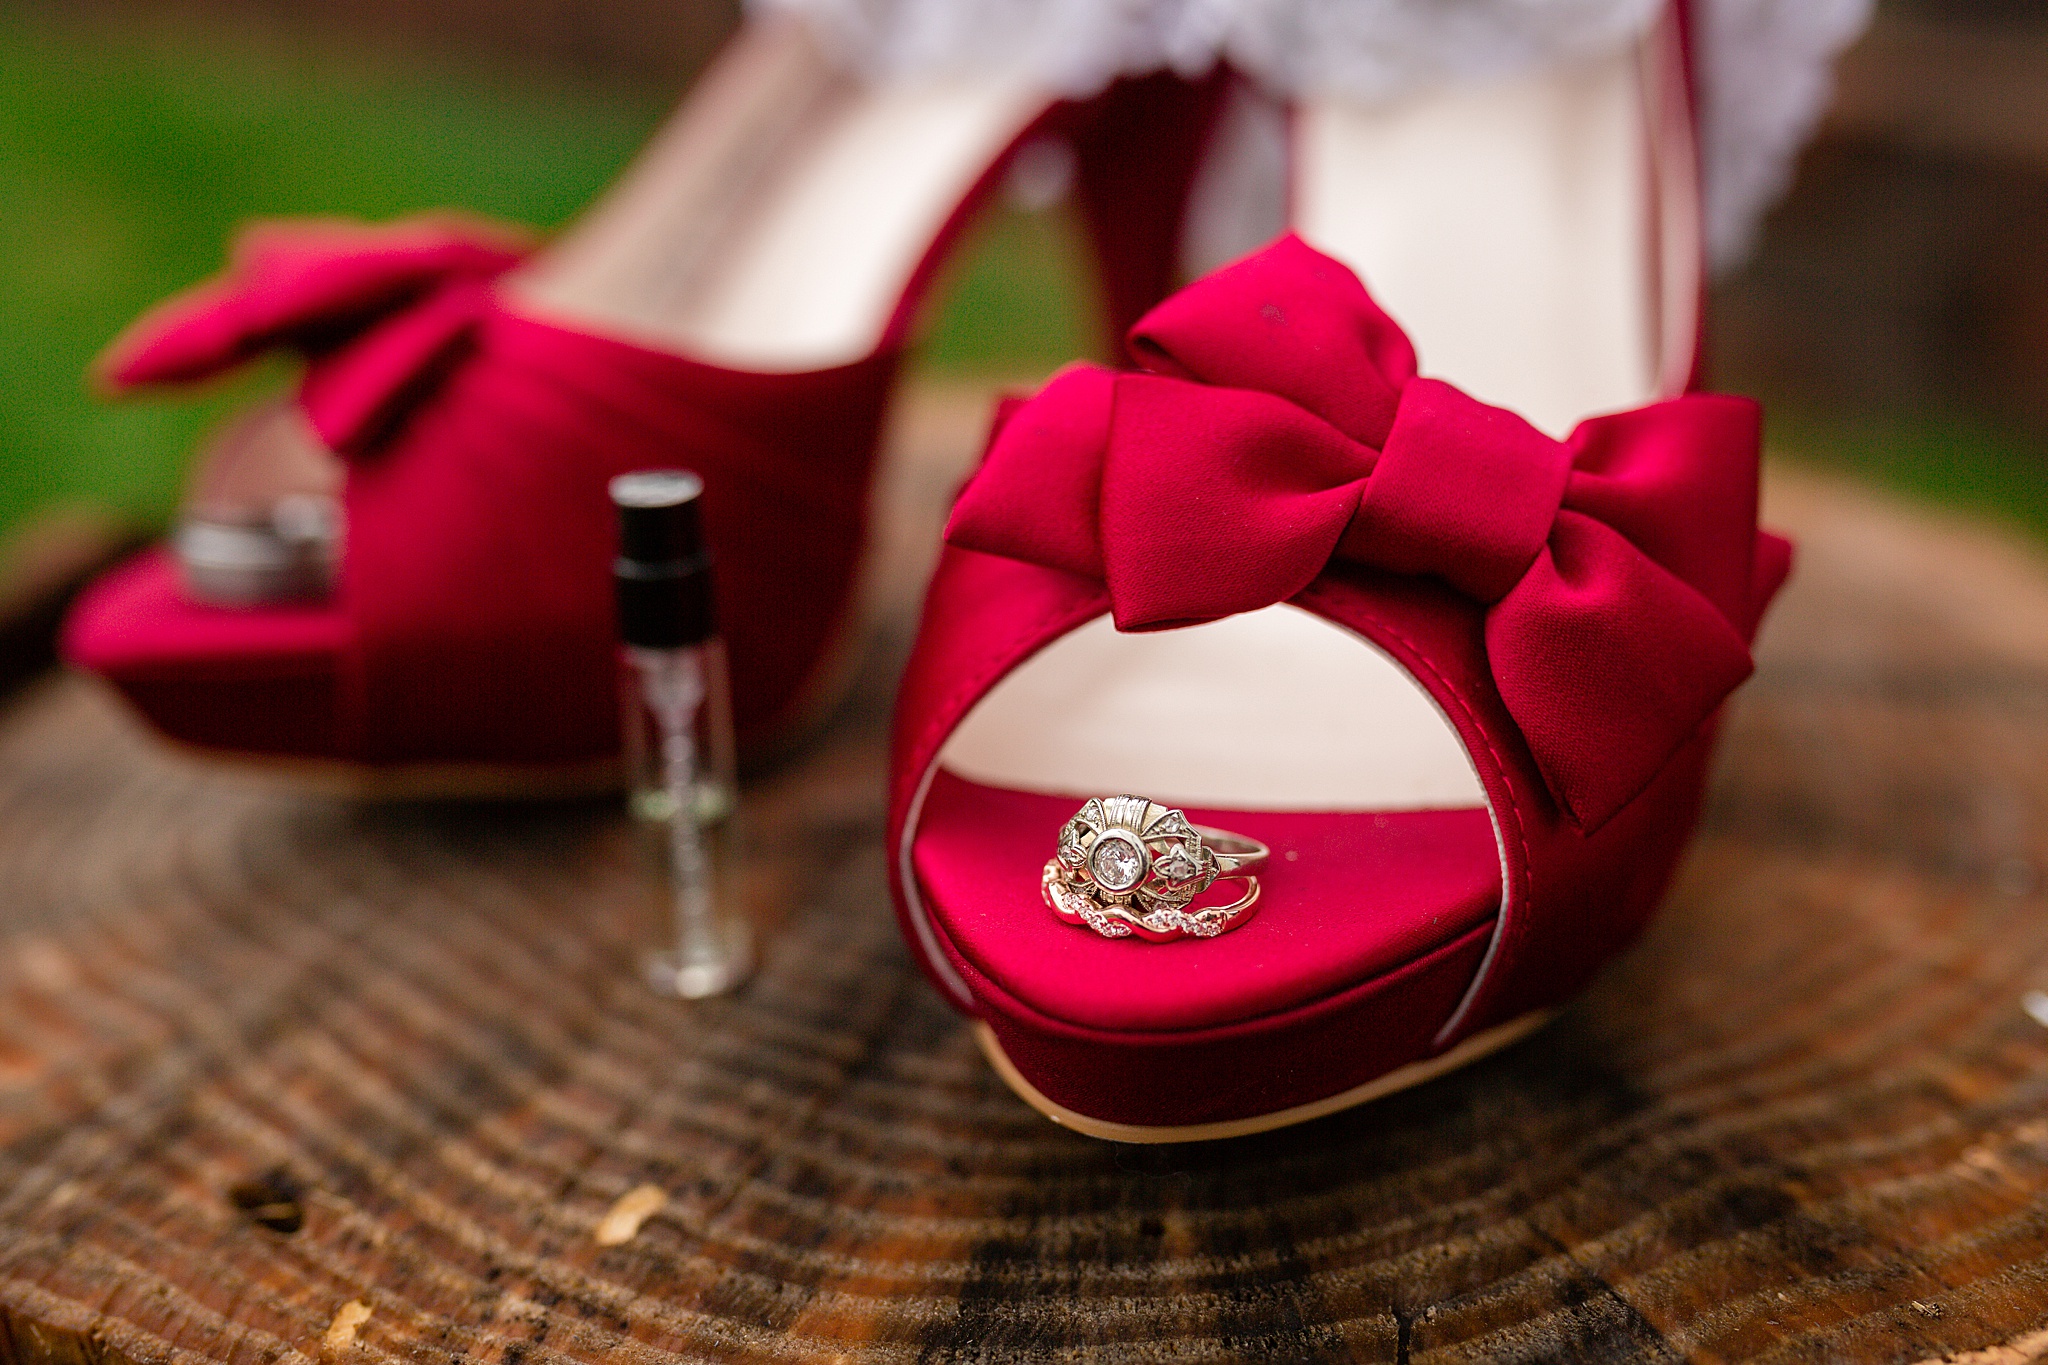 Close-up photo of wedding ring and red high heels. Tania & Chris' Denver Wedding at the Wedgewood Ken Caryl by Colorado Wedding Photography, Jennifer Garza. Colorado Wedding Photographer, Colorado Wedding Photography, Denver Wedding Photographer, Denver Wedding Photography, US Marine Corp Wedding, US Marine Corp, Military Wedding, US Marines, Wedgewood Weddings, Wedgewood Weddings Ken Caryl, Colorado Wedding, Denver Wedding, Wedding Photographer, Colorado Bride, Brides of Colorado